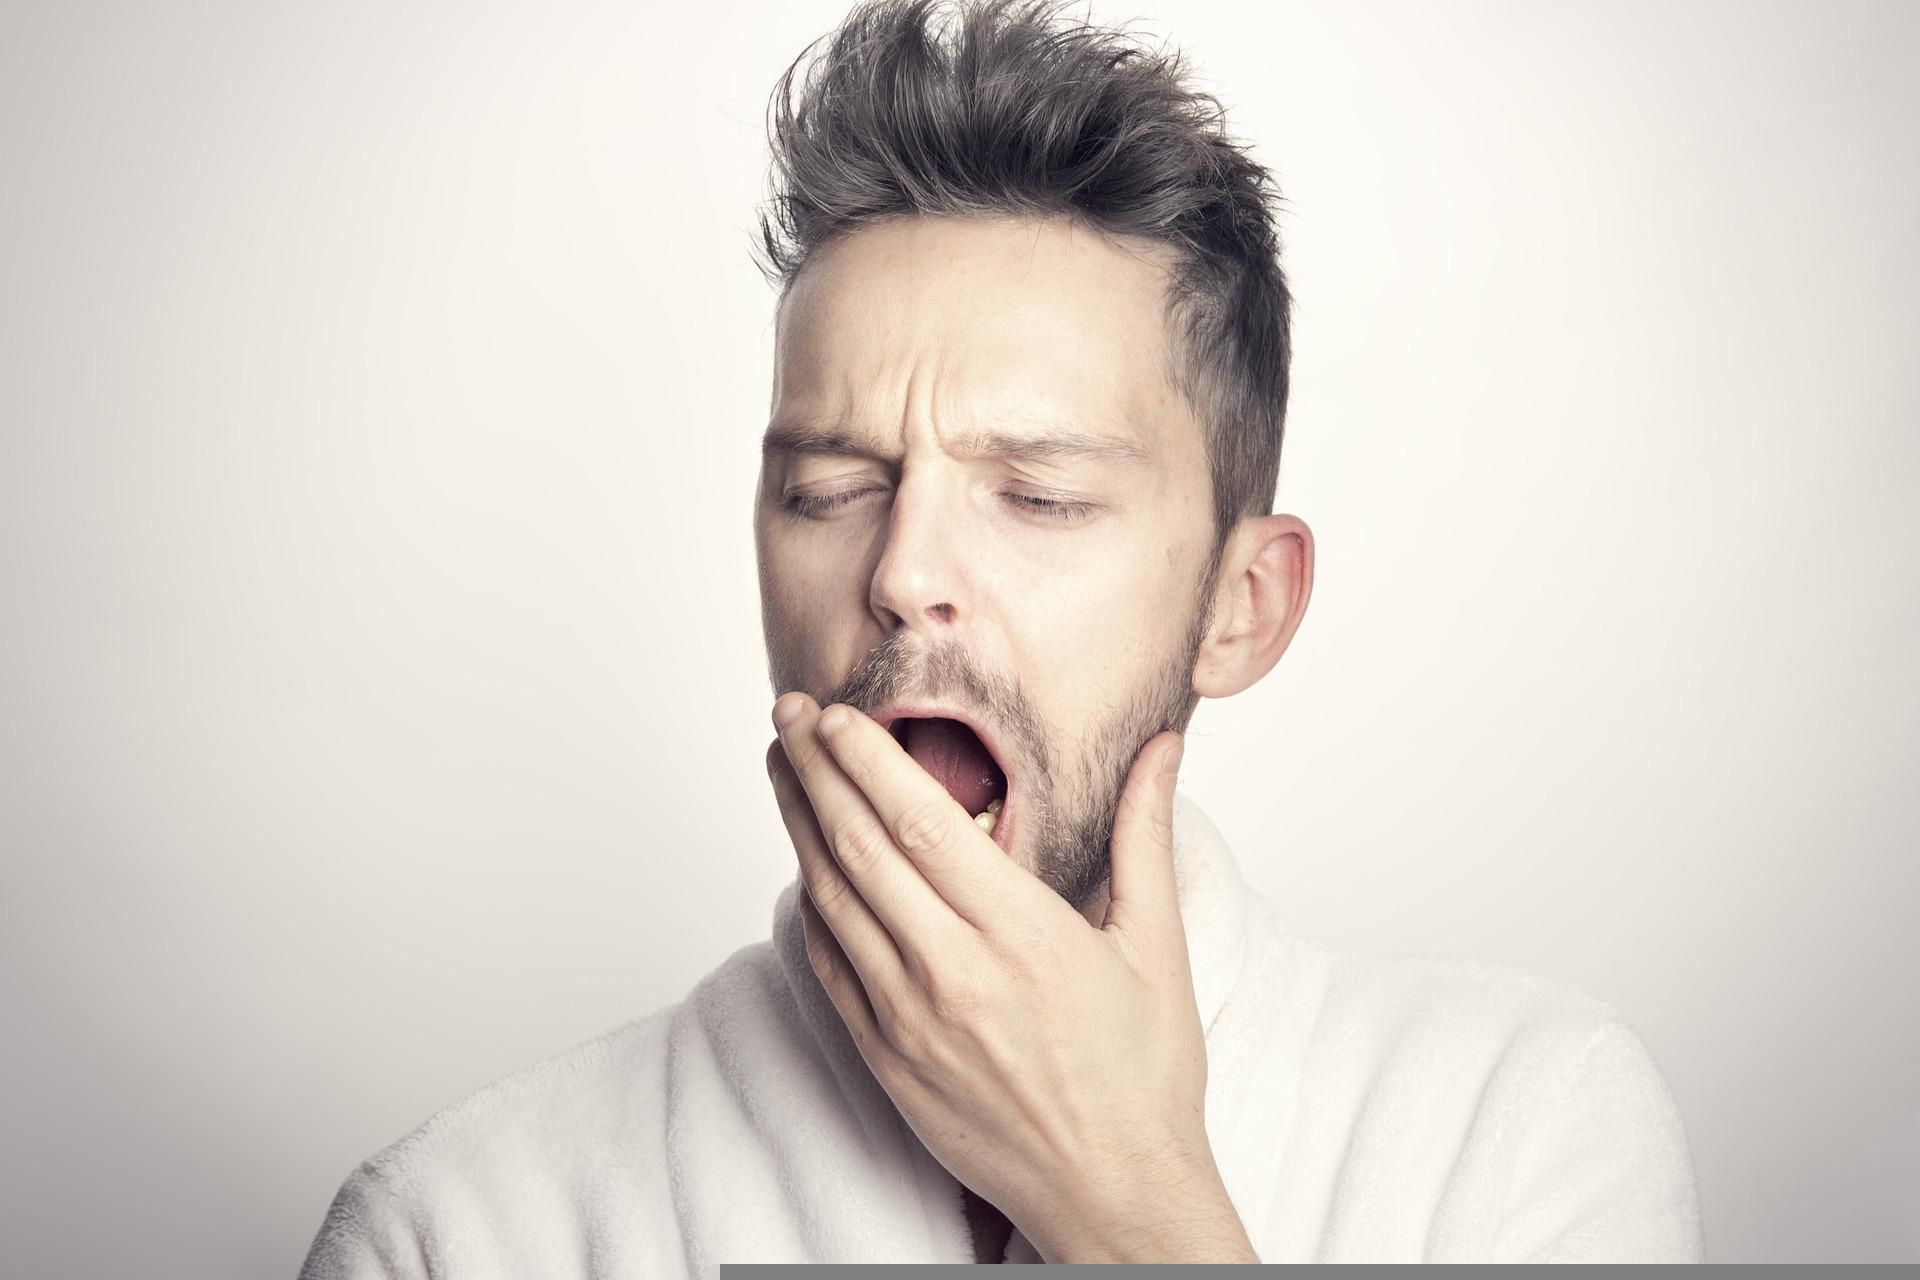 A yawning person covers their mouth